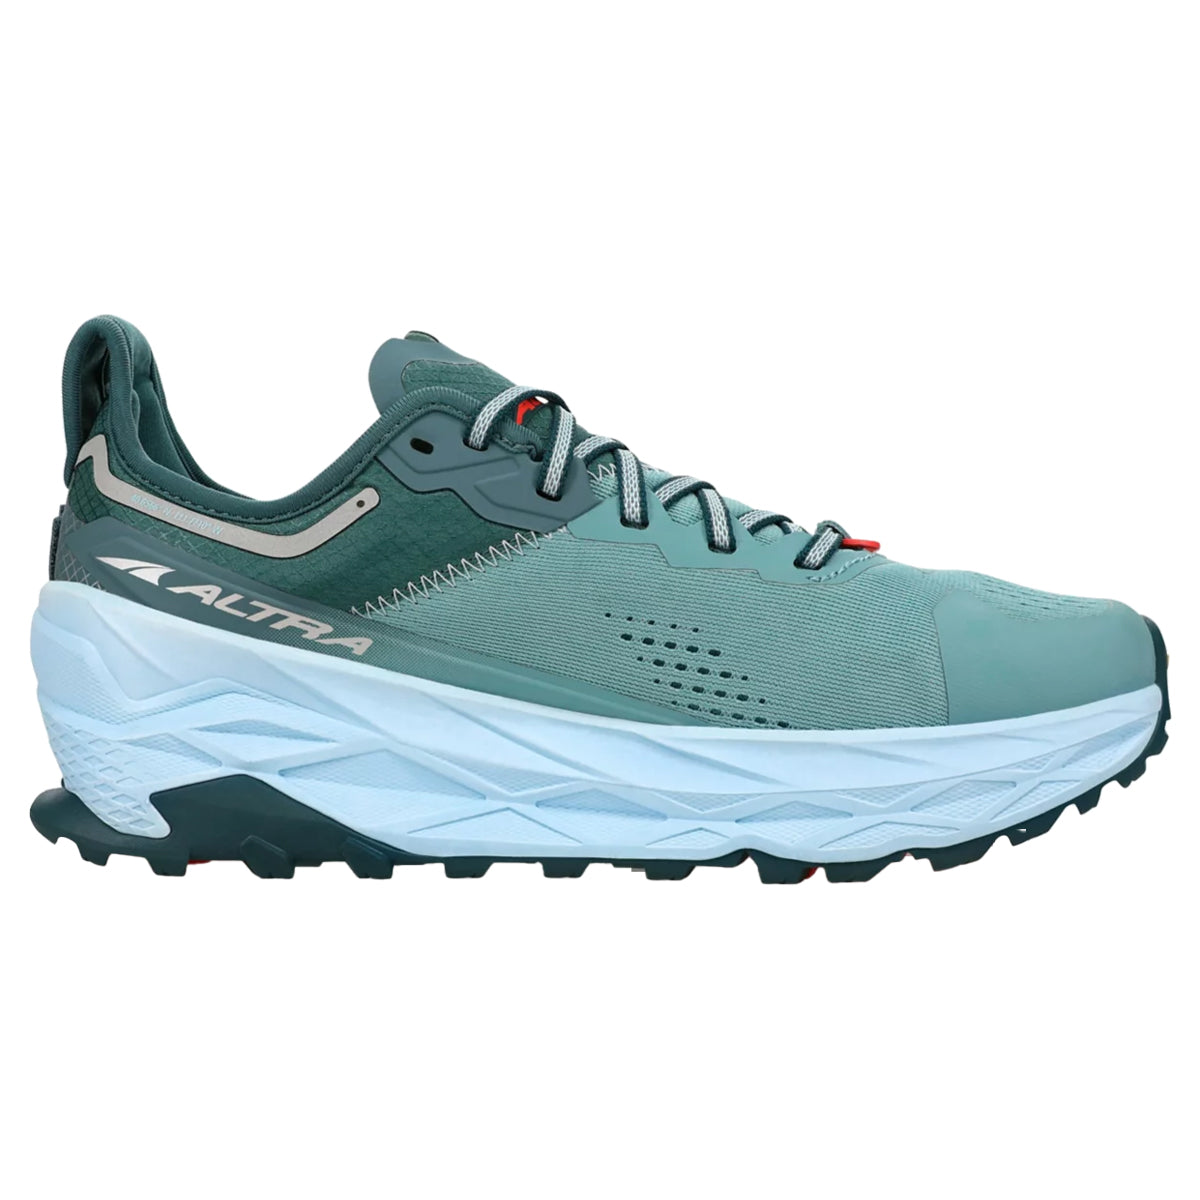 Altra Women's Olympus 5 in Dusty Teal by GOHUNT | Altra - GOHUNT Shop